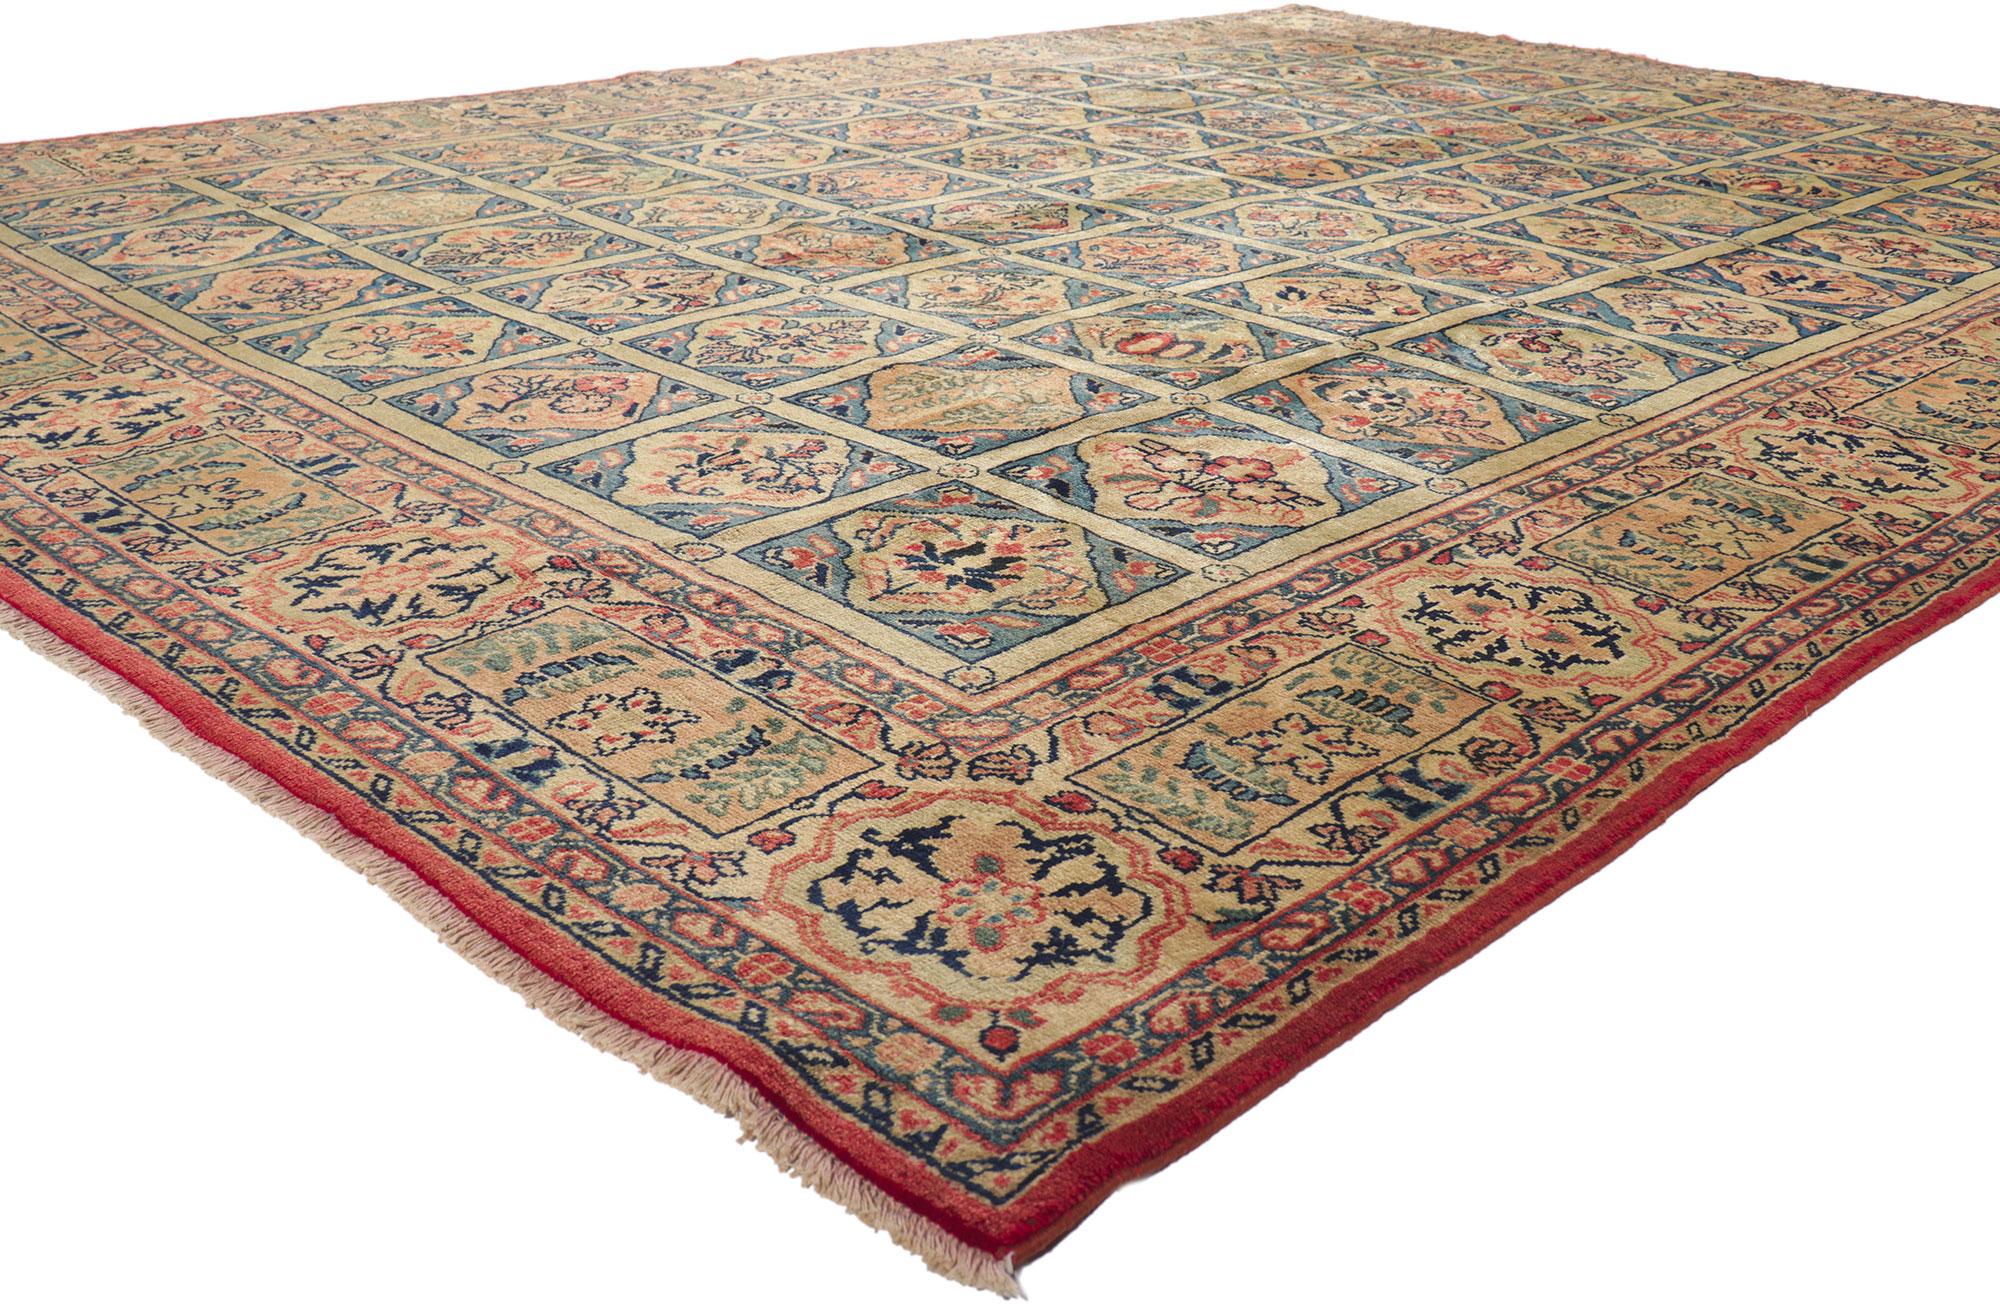 61198 Vintage Persian Mahal rug, 09'02 x 12'08.
Full of tiny details, this hand knotted wool vintage Persian Mahal rug is a captivating vision of woven beauty. The cleverly composed composition features a compartmental panel design showcasing an